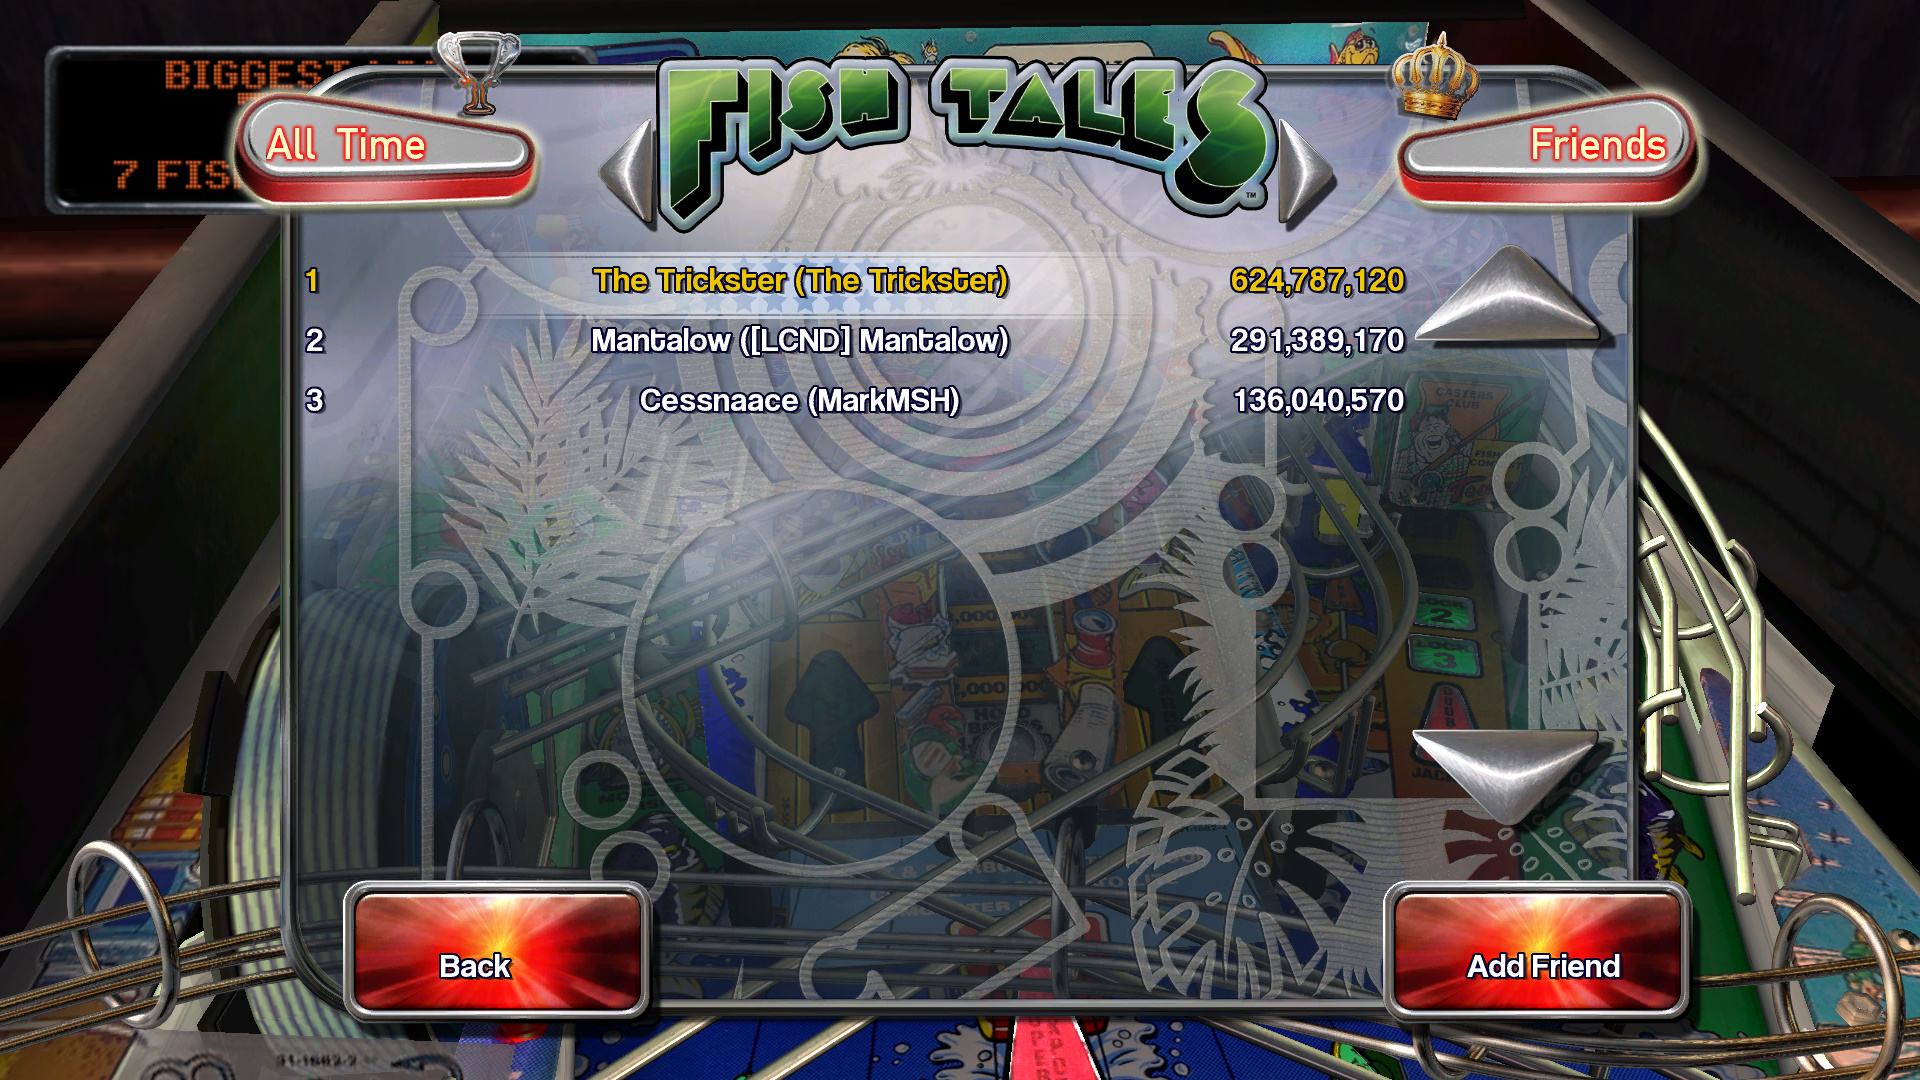 TheTrickster: Pinball Arcade: Fish Tales (PC) 624,787,120 points on 2015-11-01 04:36:59